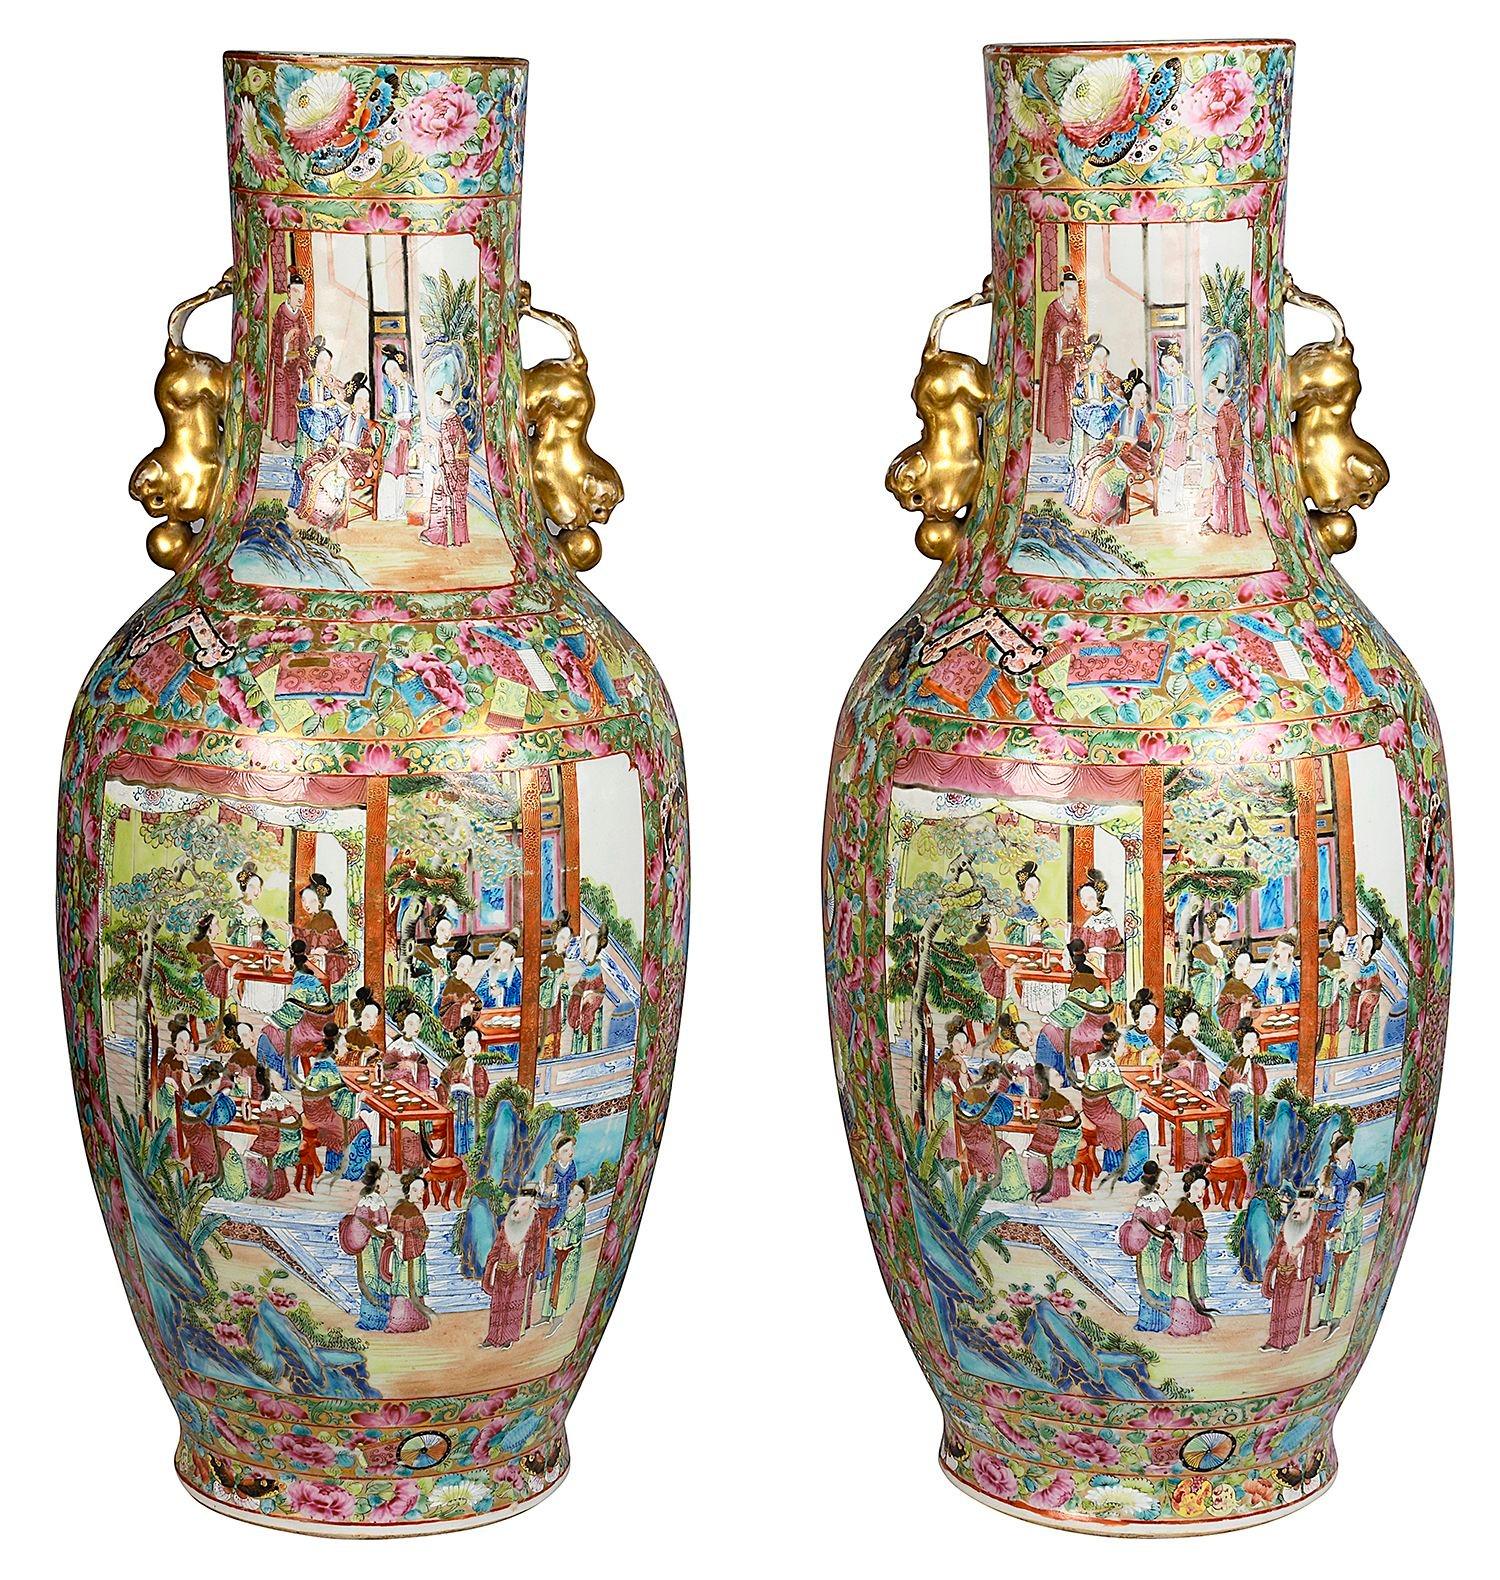 A very good quality pair of 19th Century Chinese Canton / Rose medallion vases / lamps. Each with wonderful bold classical greens and pinks, pairs of gilded Foo dog handles. The ground with the traditional floral and motif decoration, inset hand